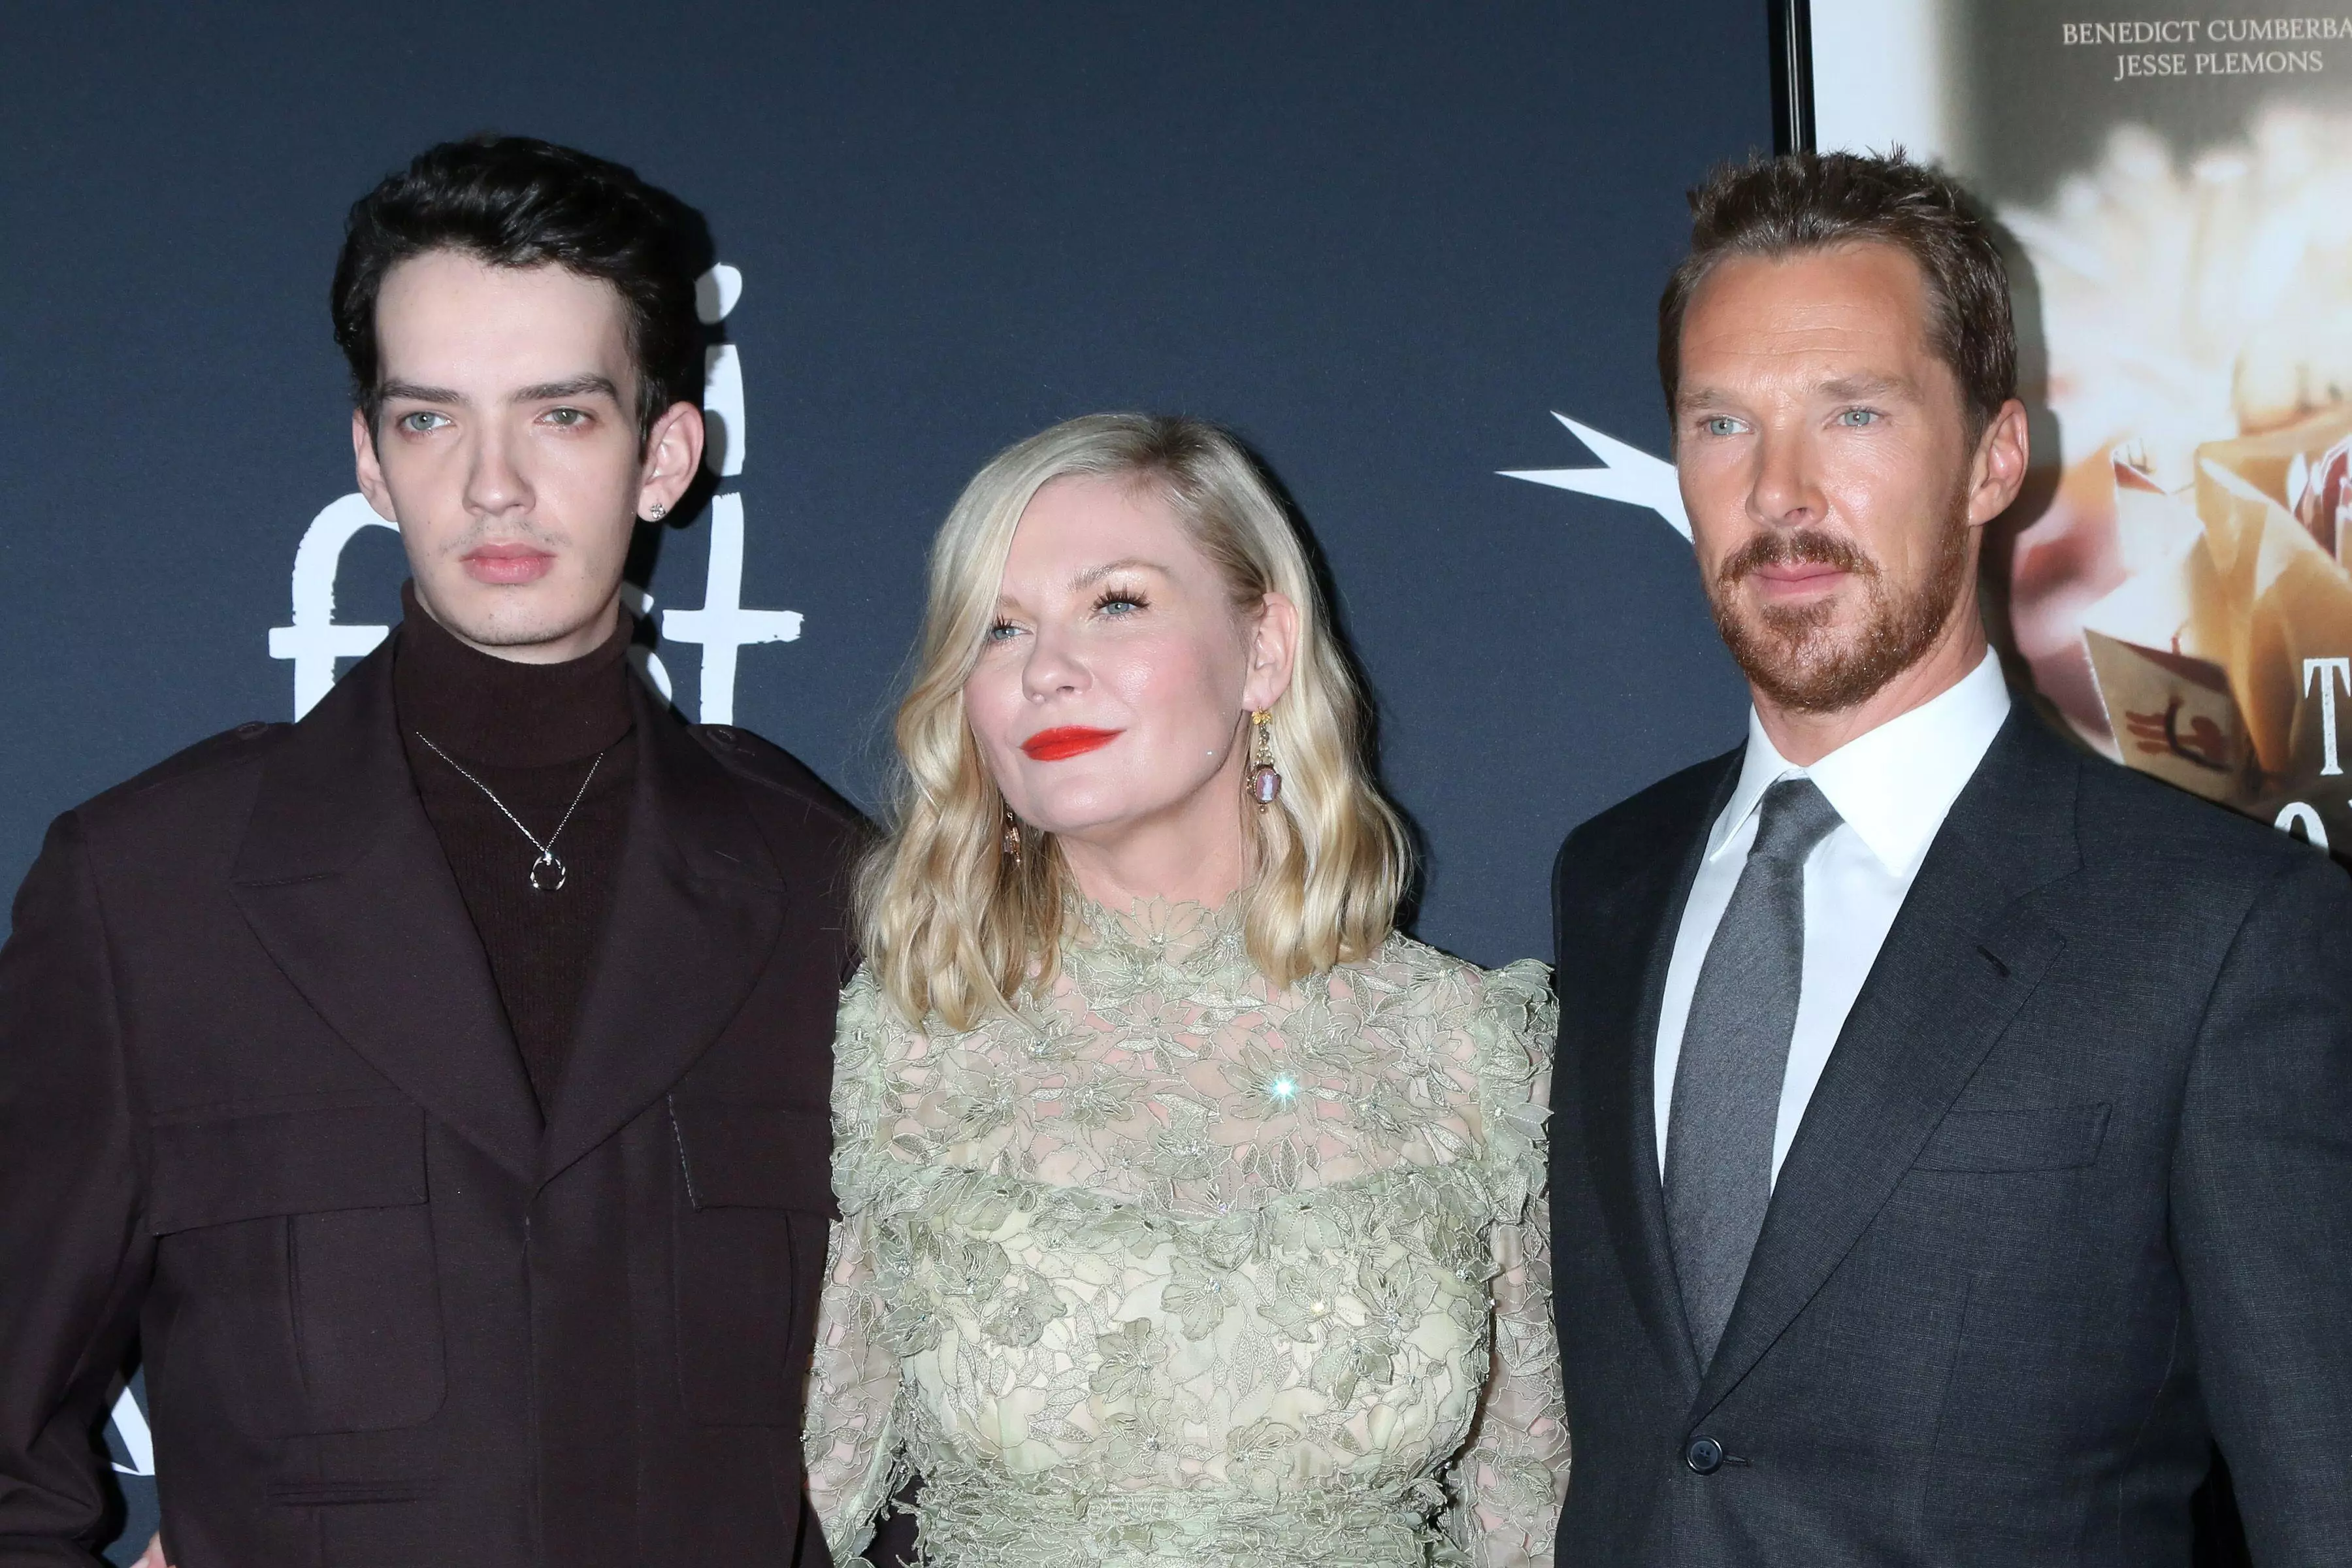 Benedict Cumberbatch with The Power Of The Dog co-stars Kirsten Dunst and Kodi Smit-McPhee.